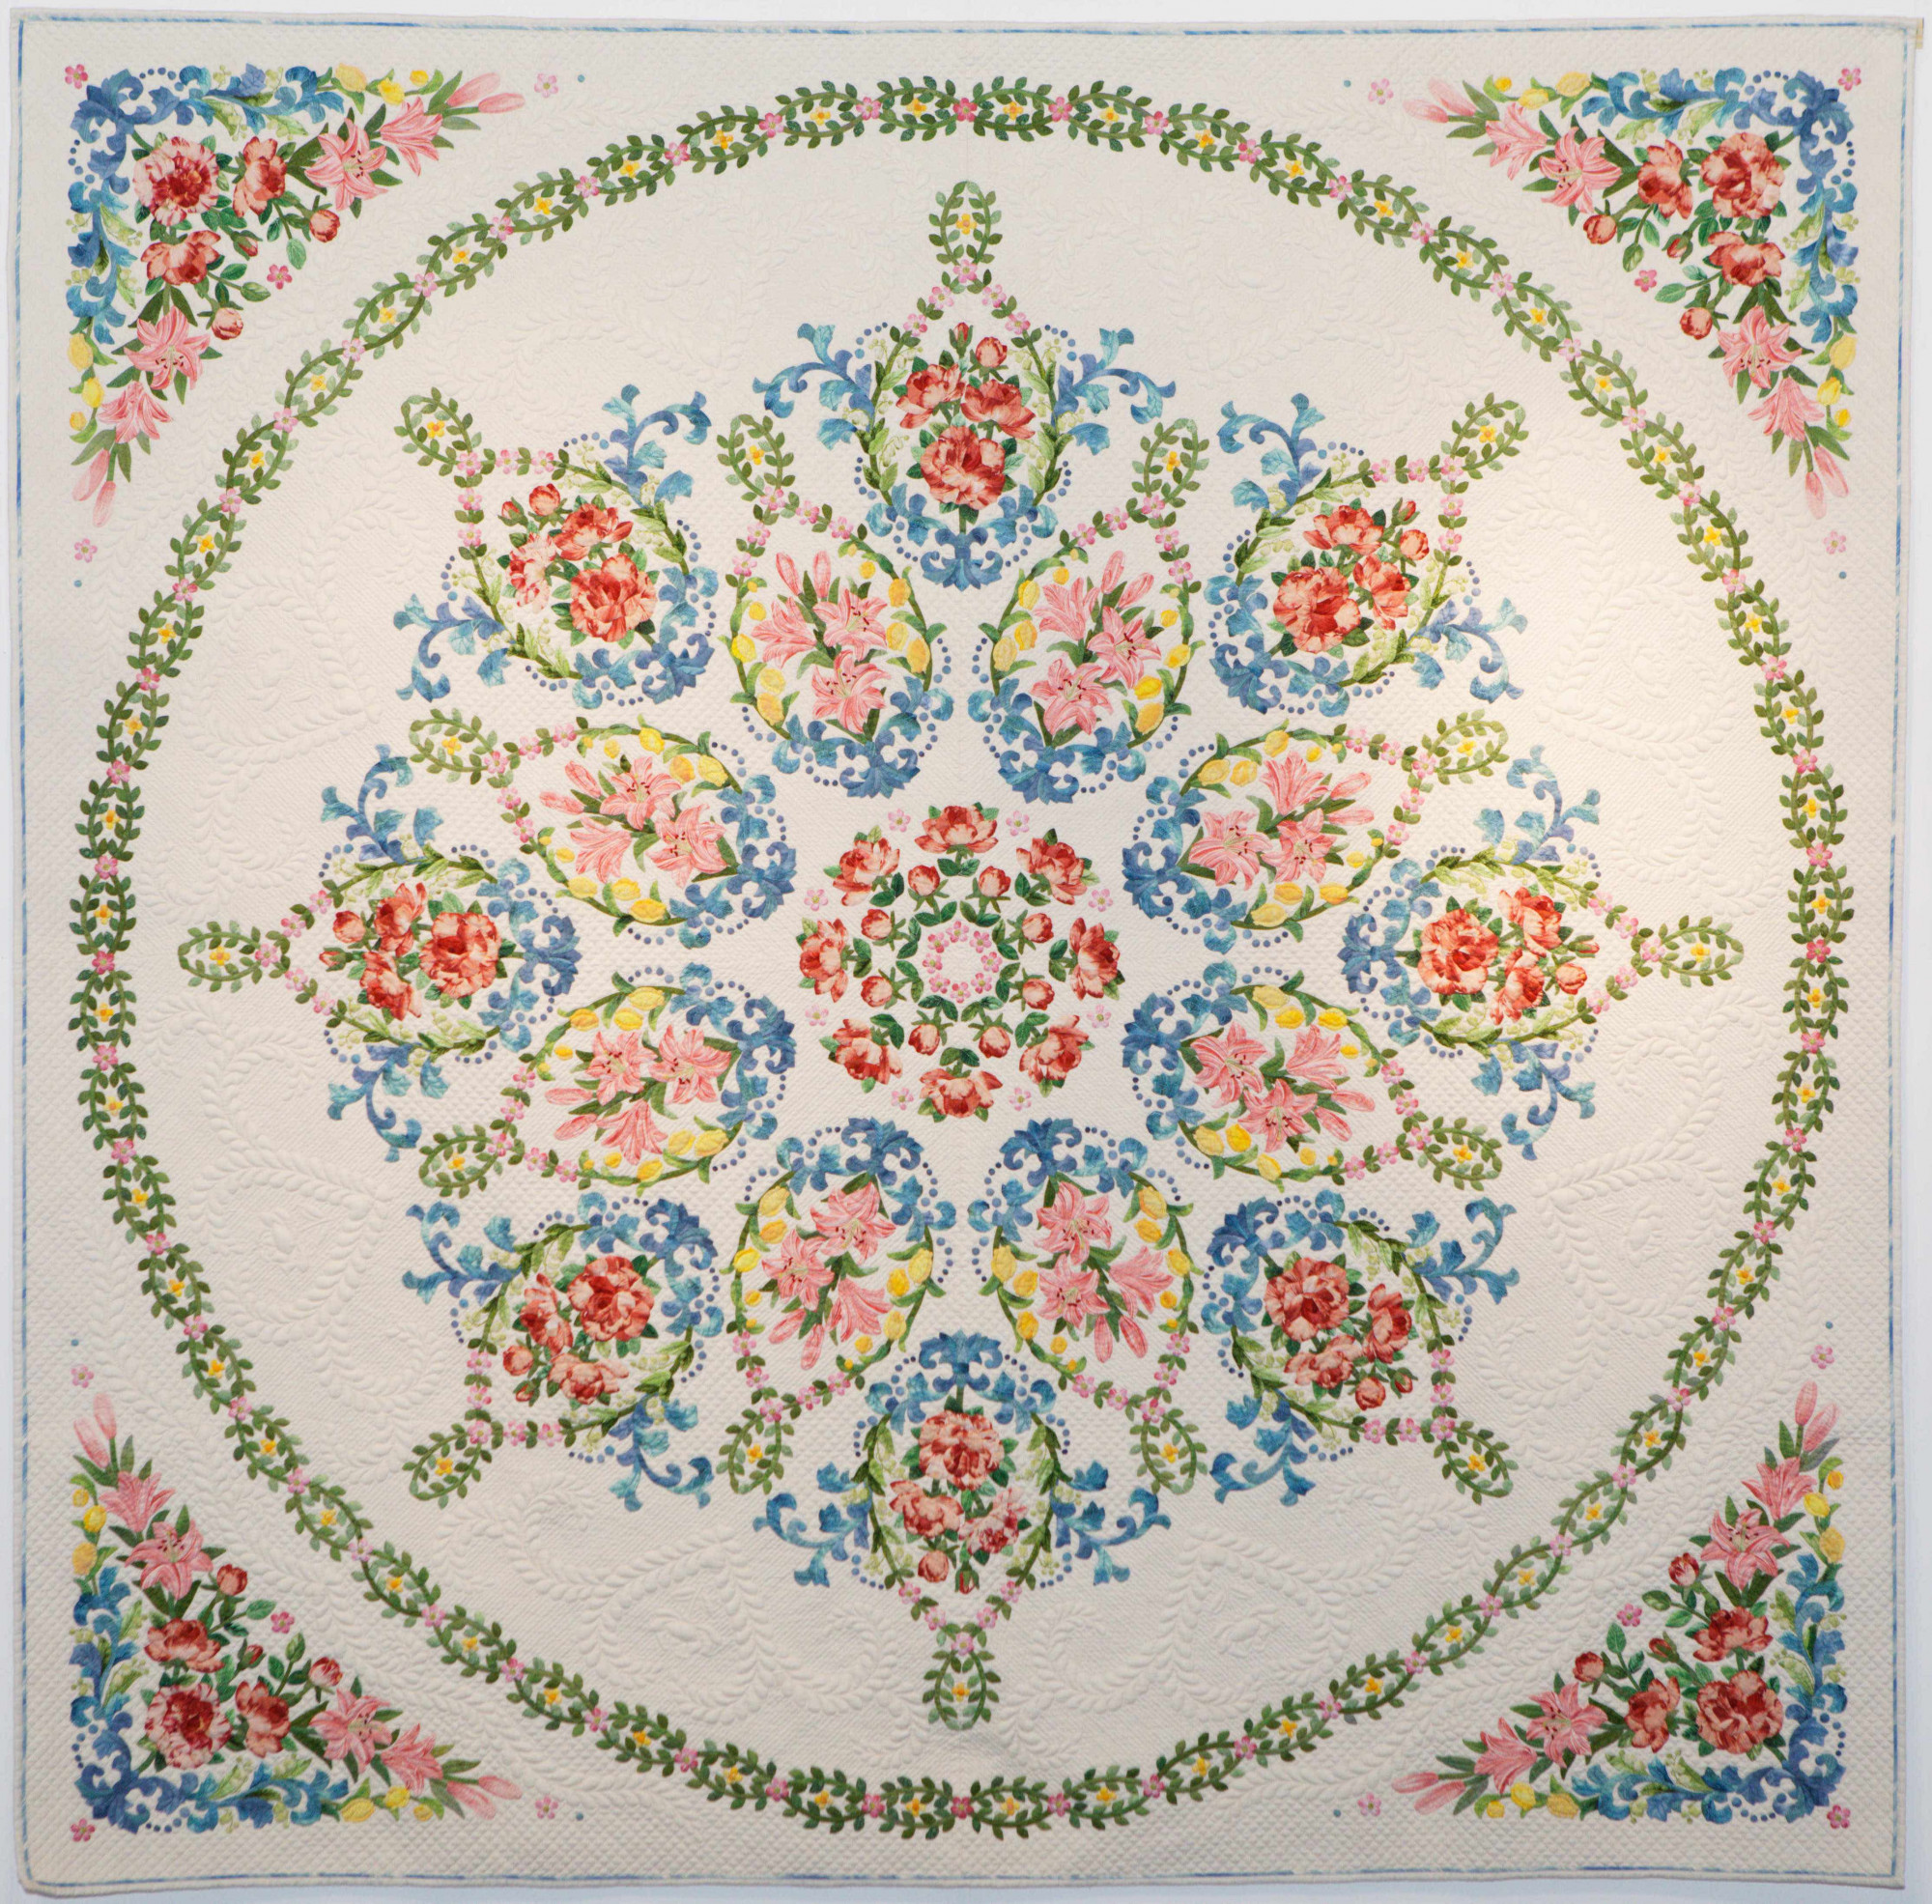 Flower Festival by Sachiko Chiba (Photo from Festival of Quilts)